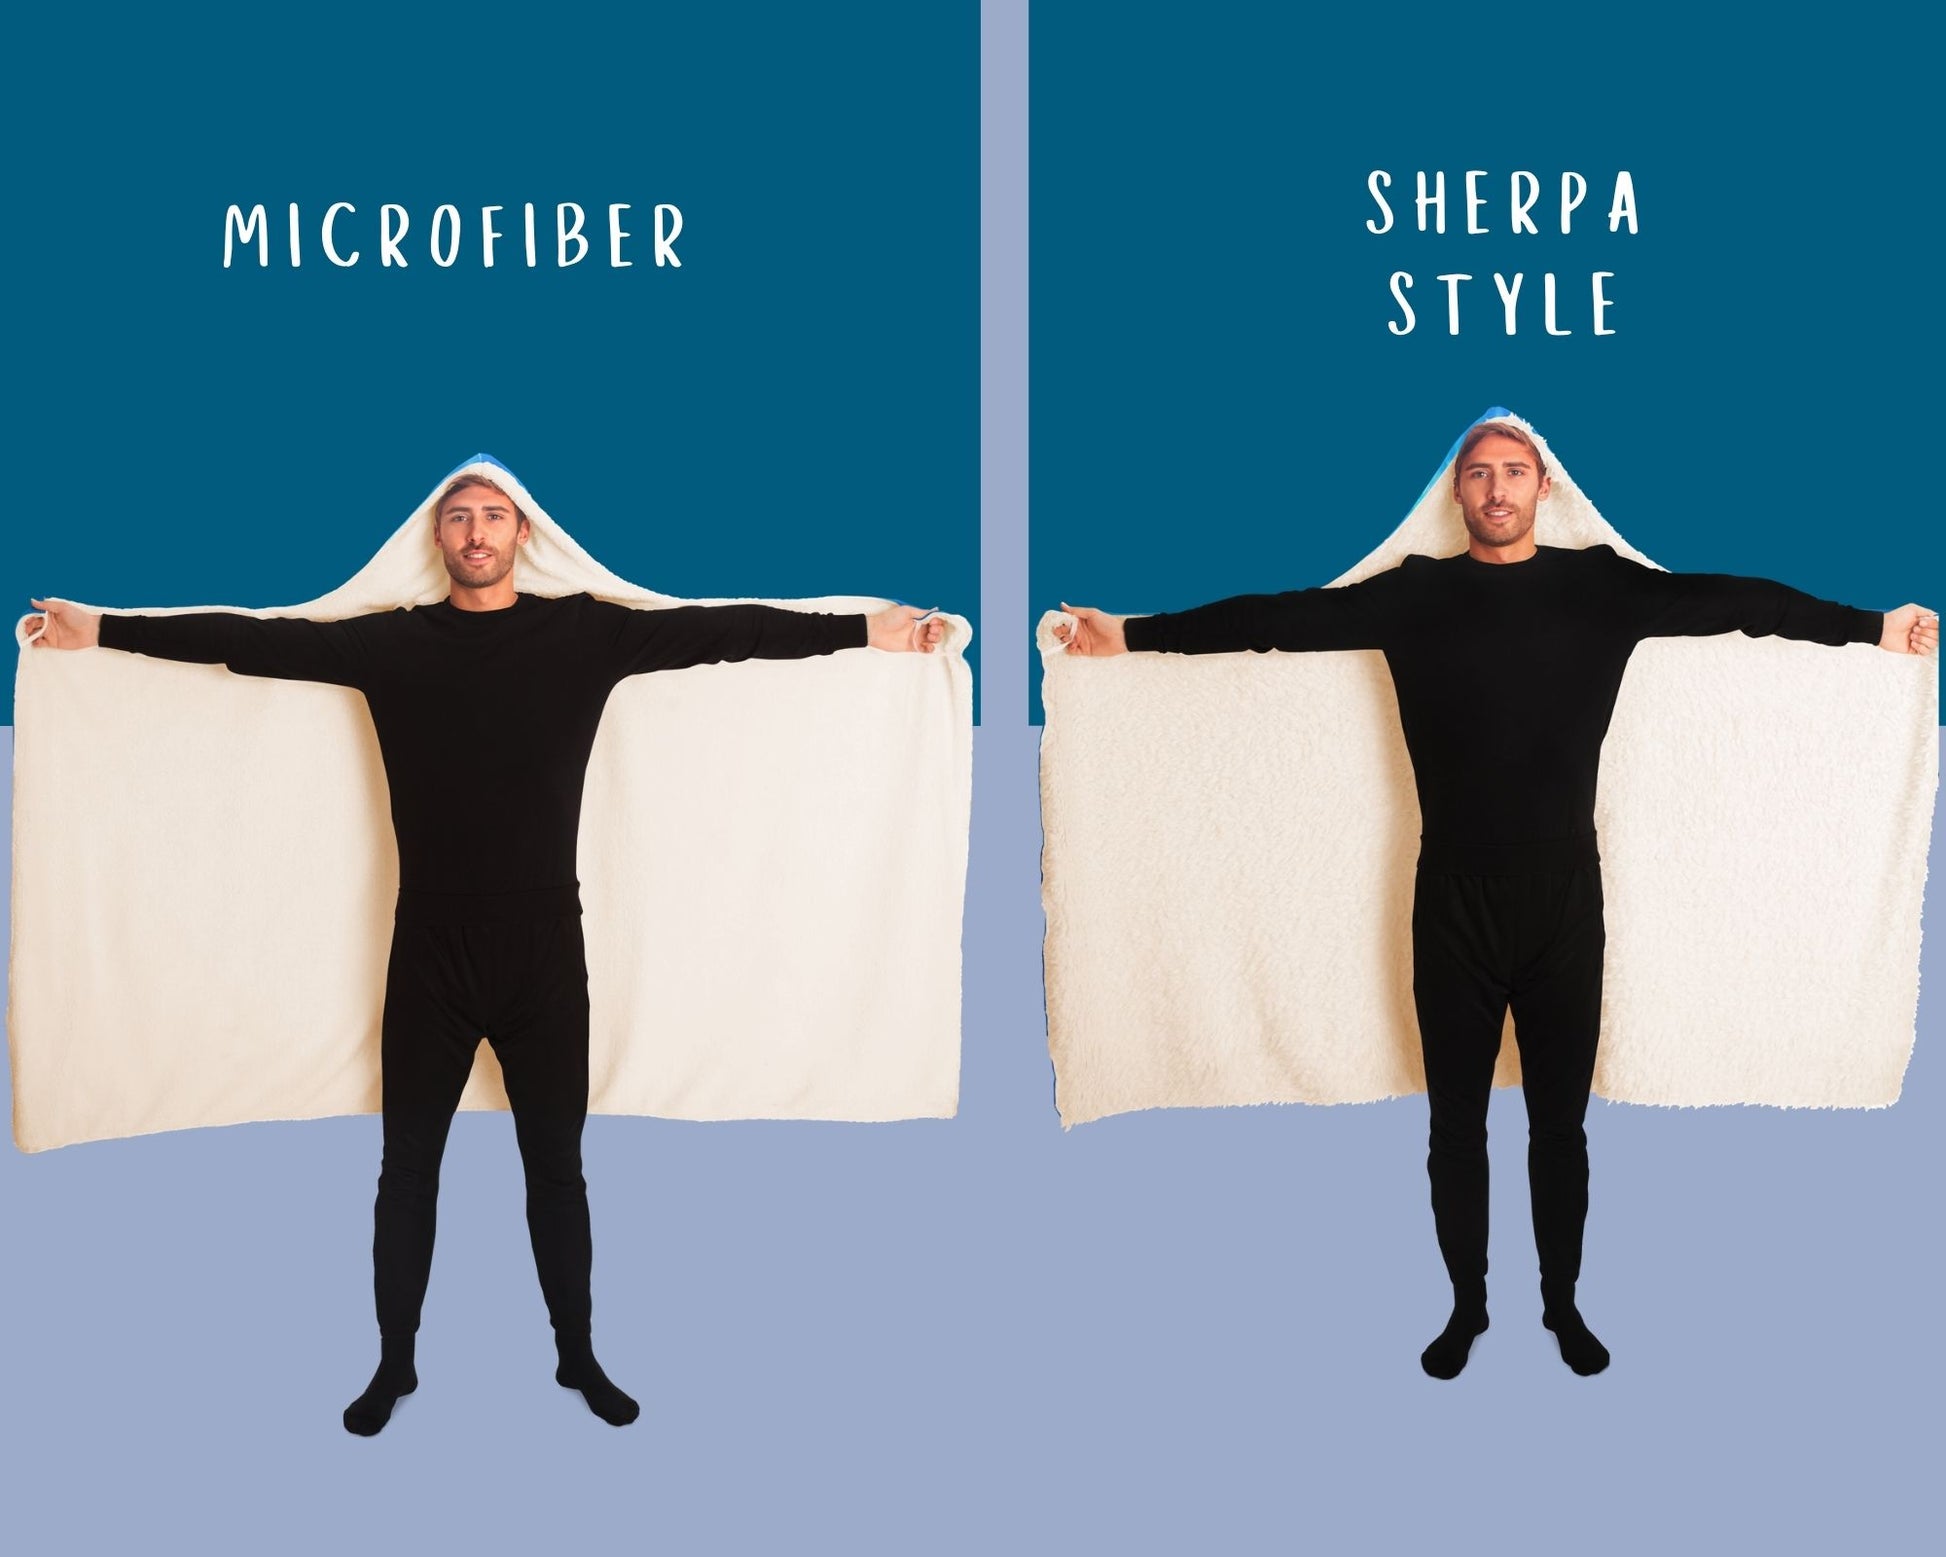 Microfiber and Sherpa style wool comparison of manta ray hooded blanket